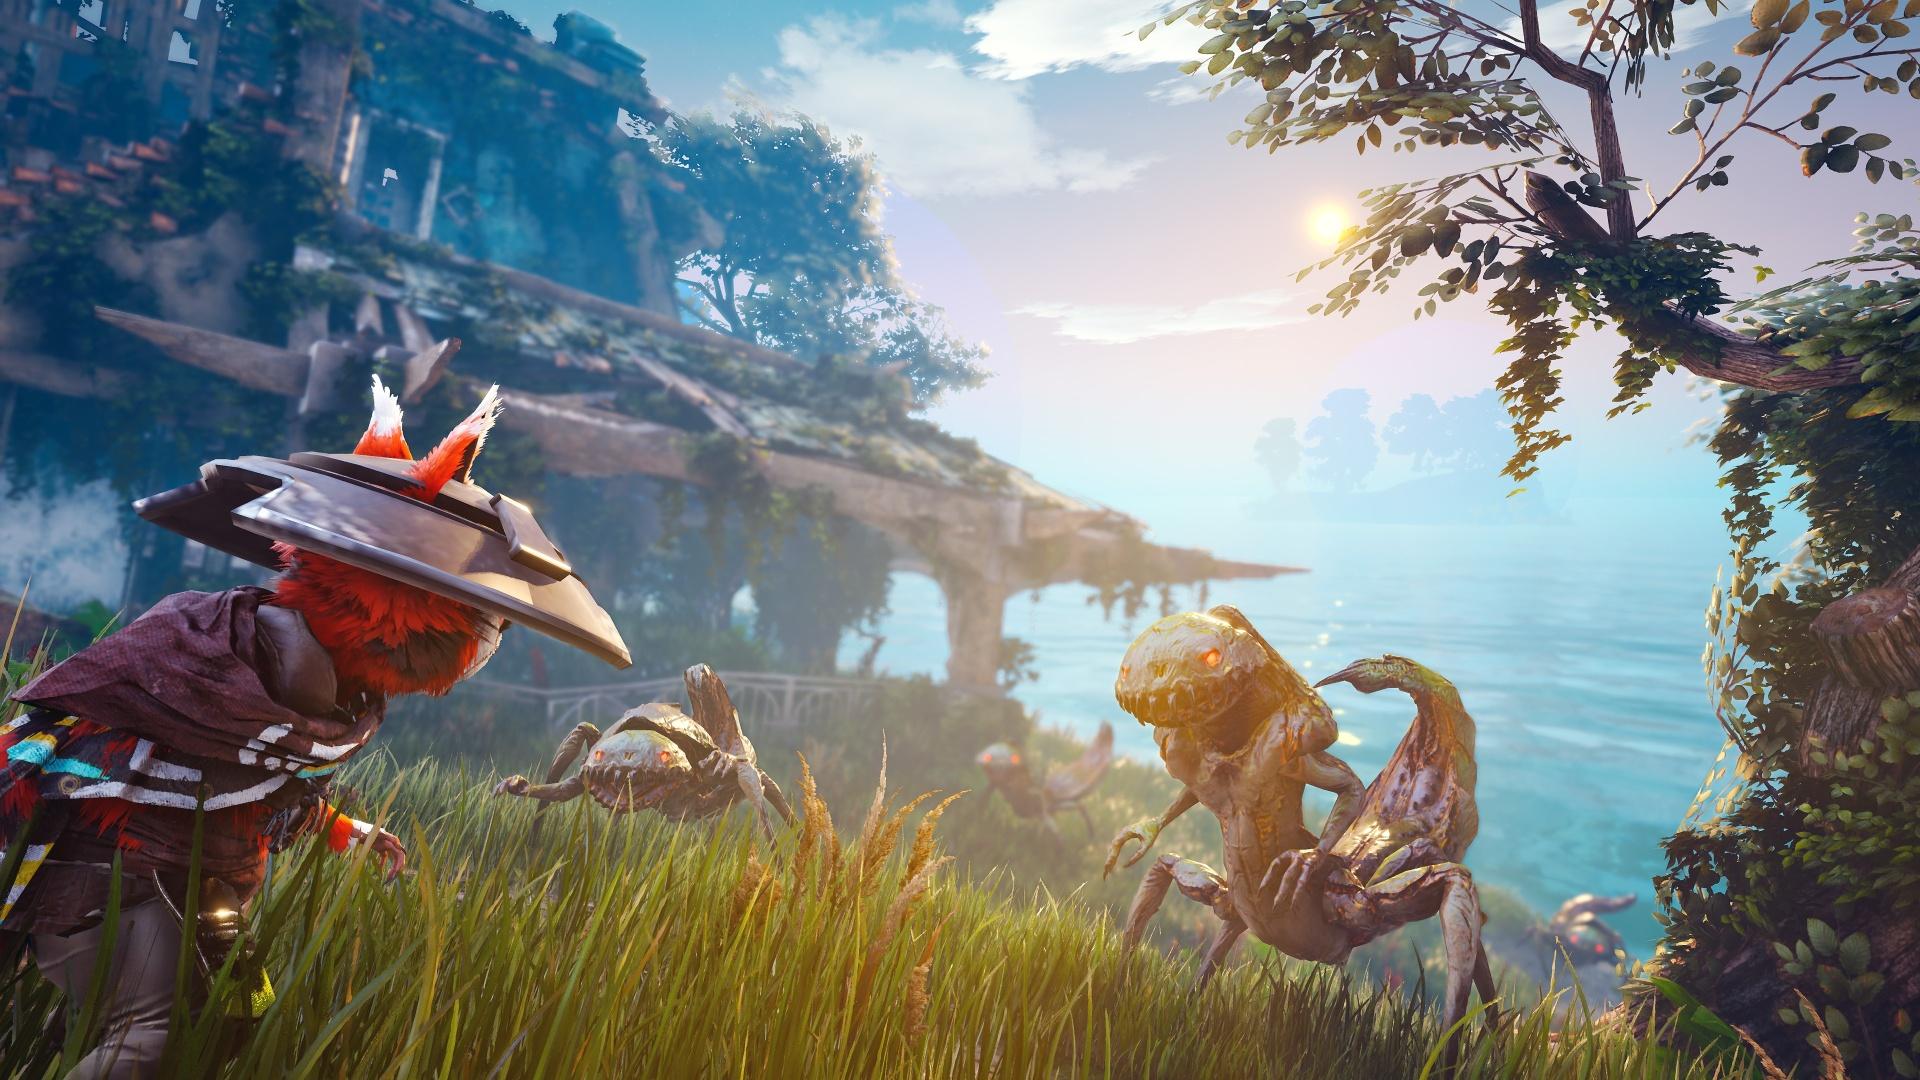 Download BioMutant HD Wallpaper for free games review, play